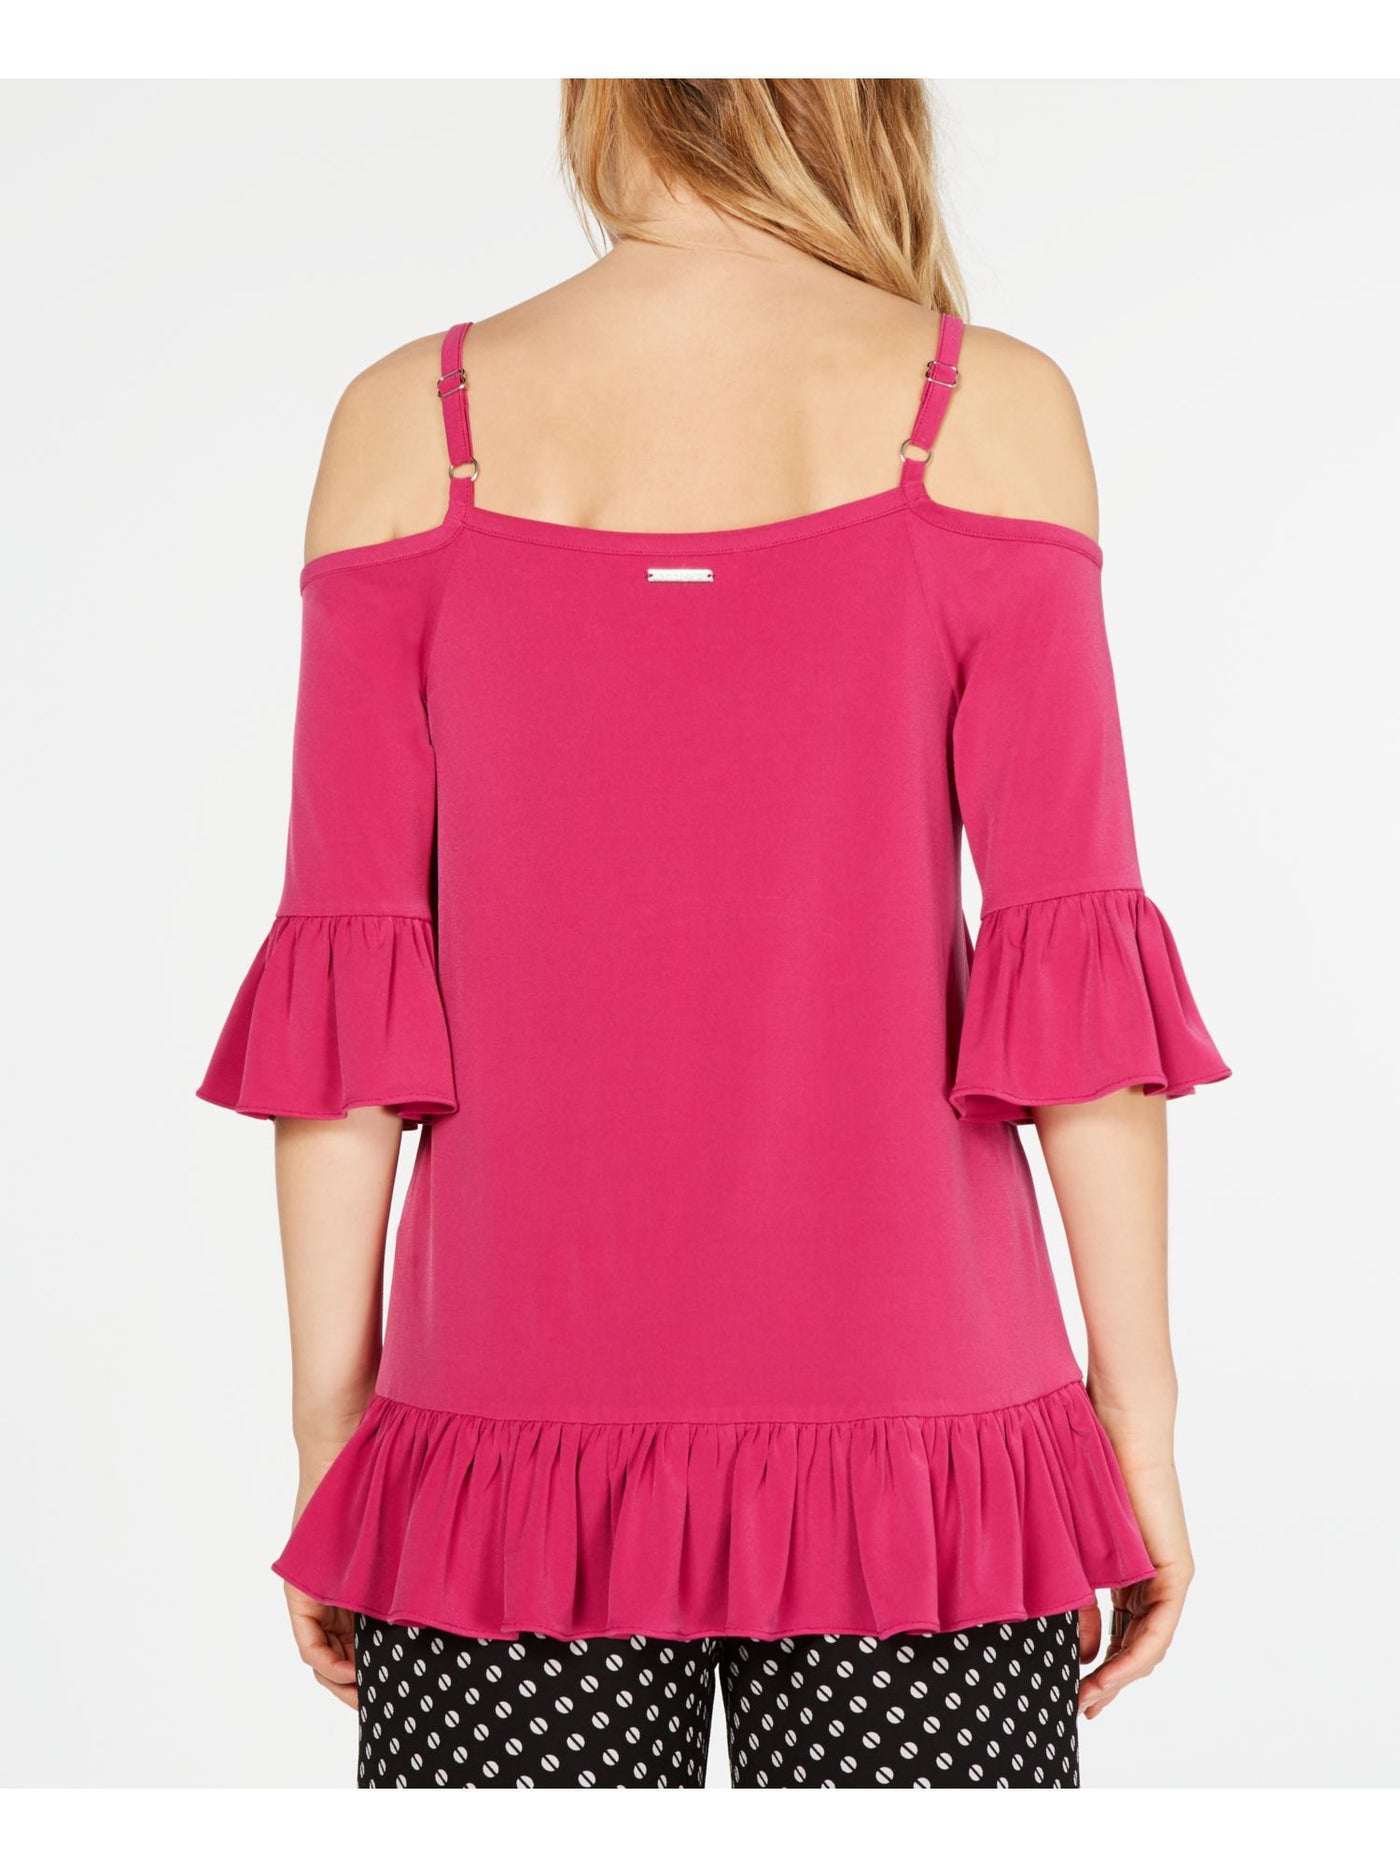 MICHAEL KORS Womens Pink Cold Shoulder Bell Sleeve Square Neck Top XS